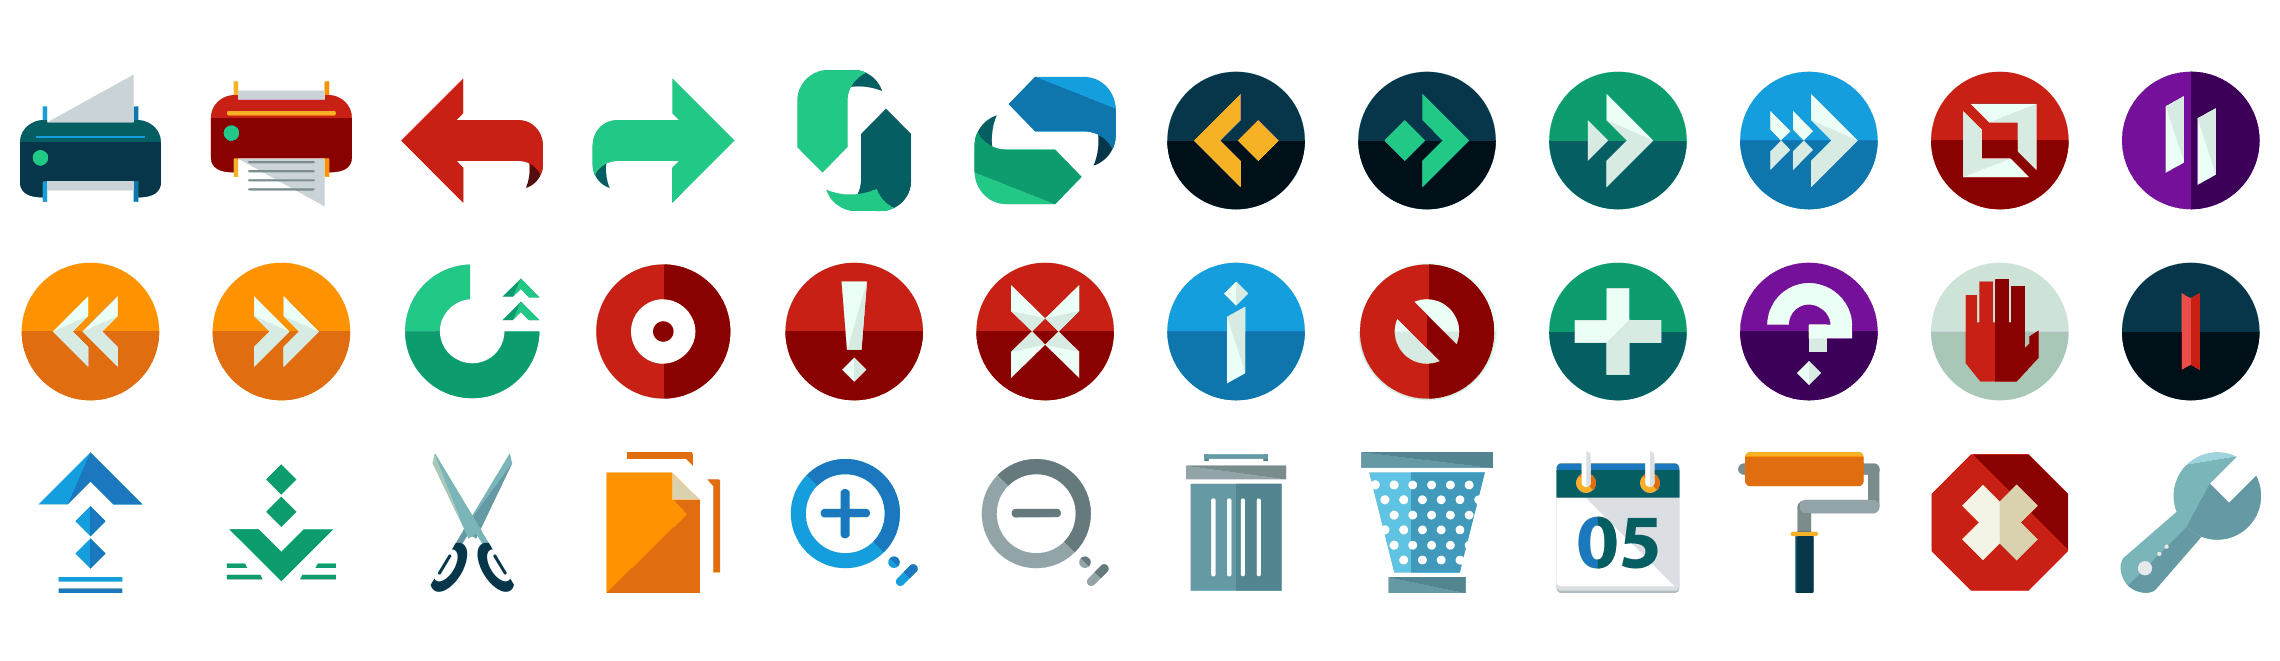 3000 Flat Icons In Sketch Illustrator Svg And Png